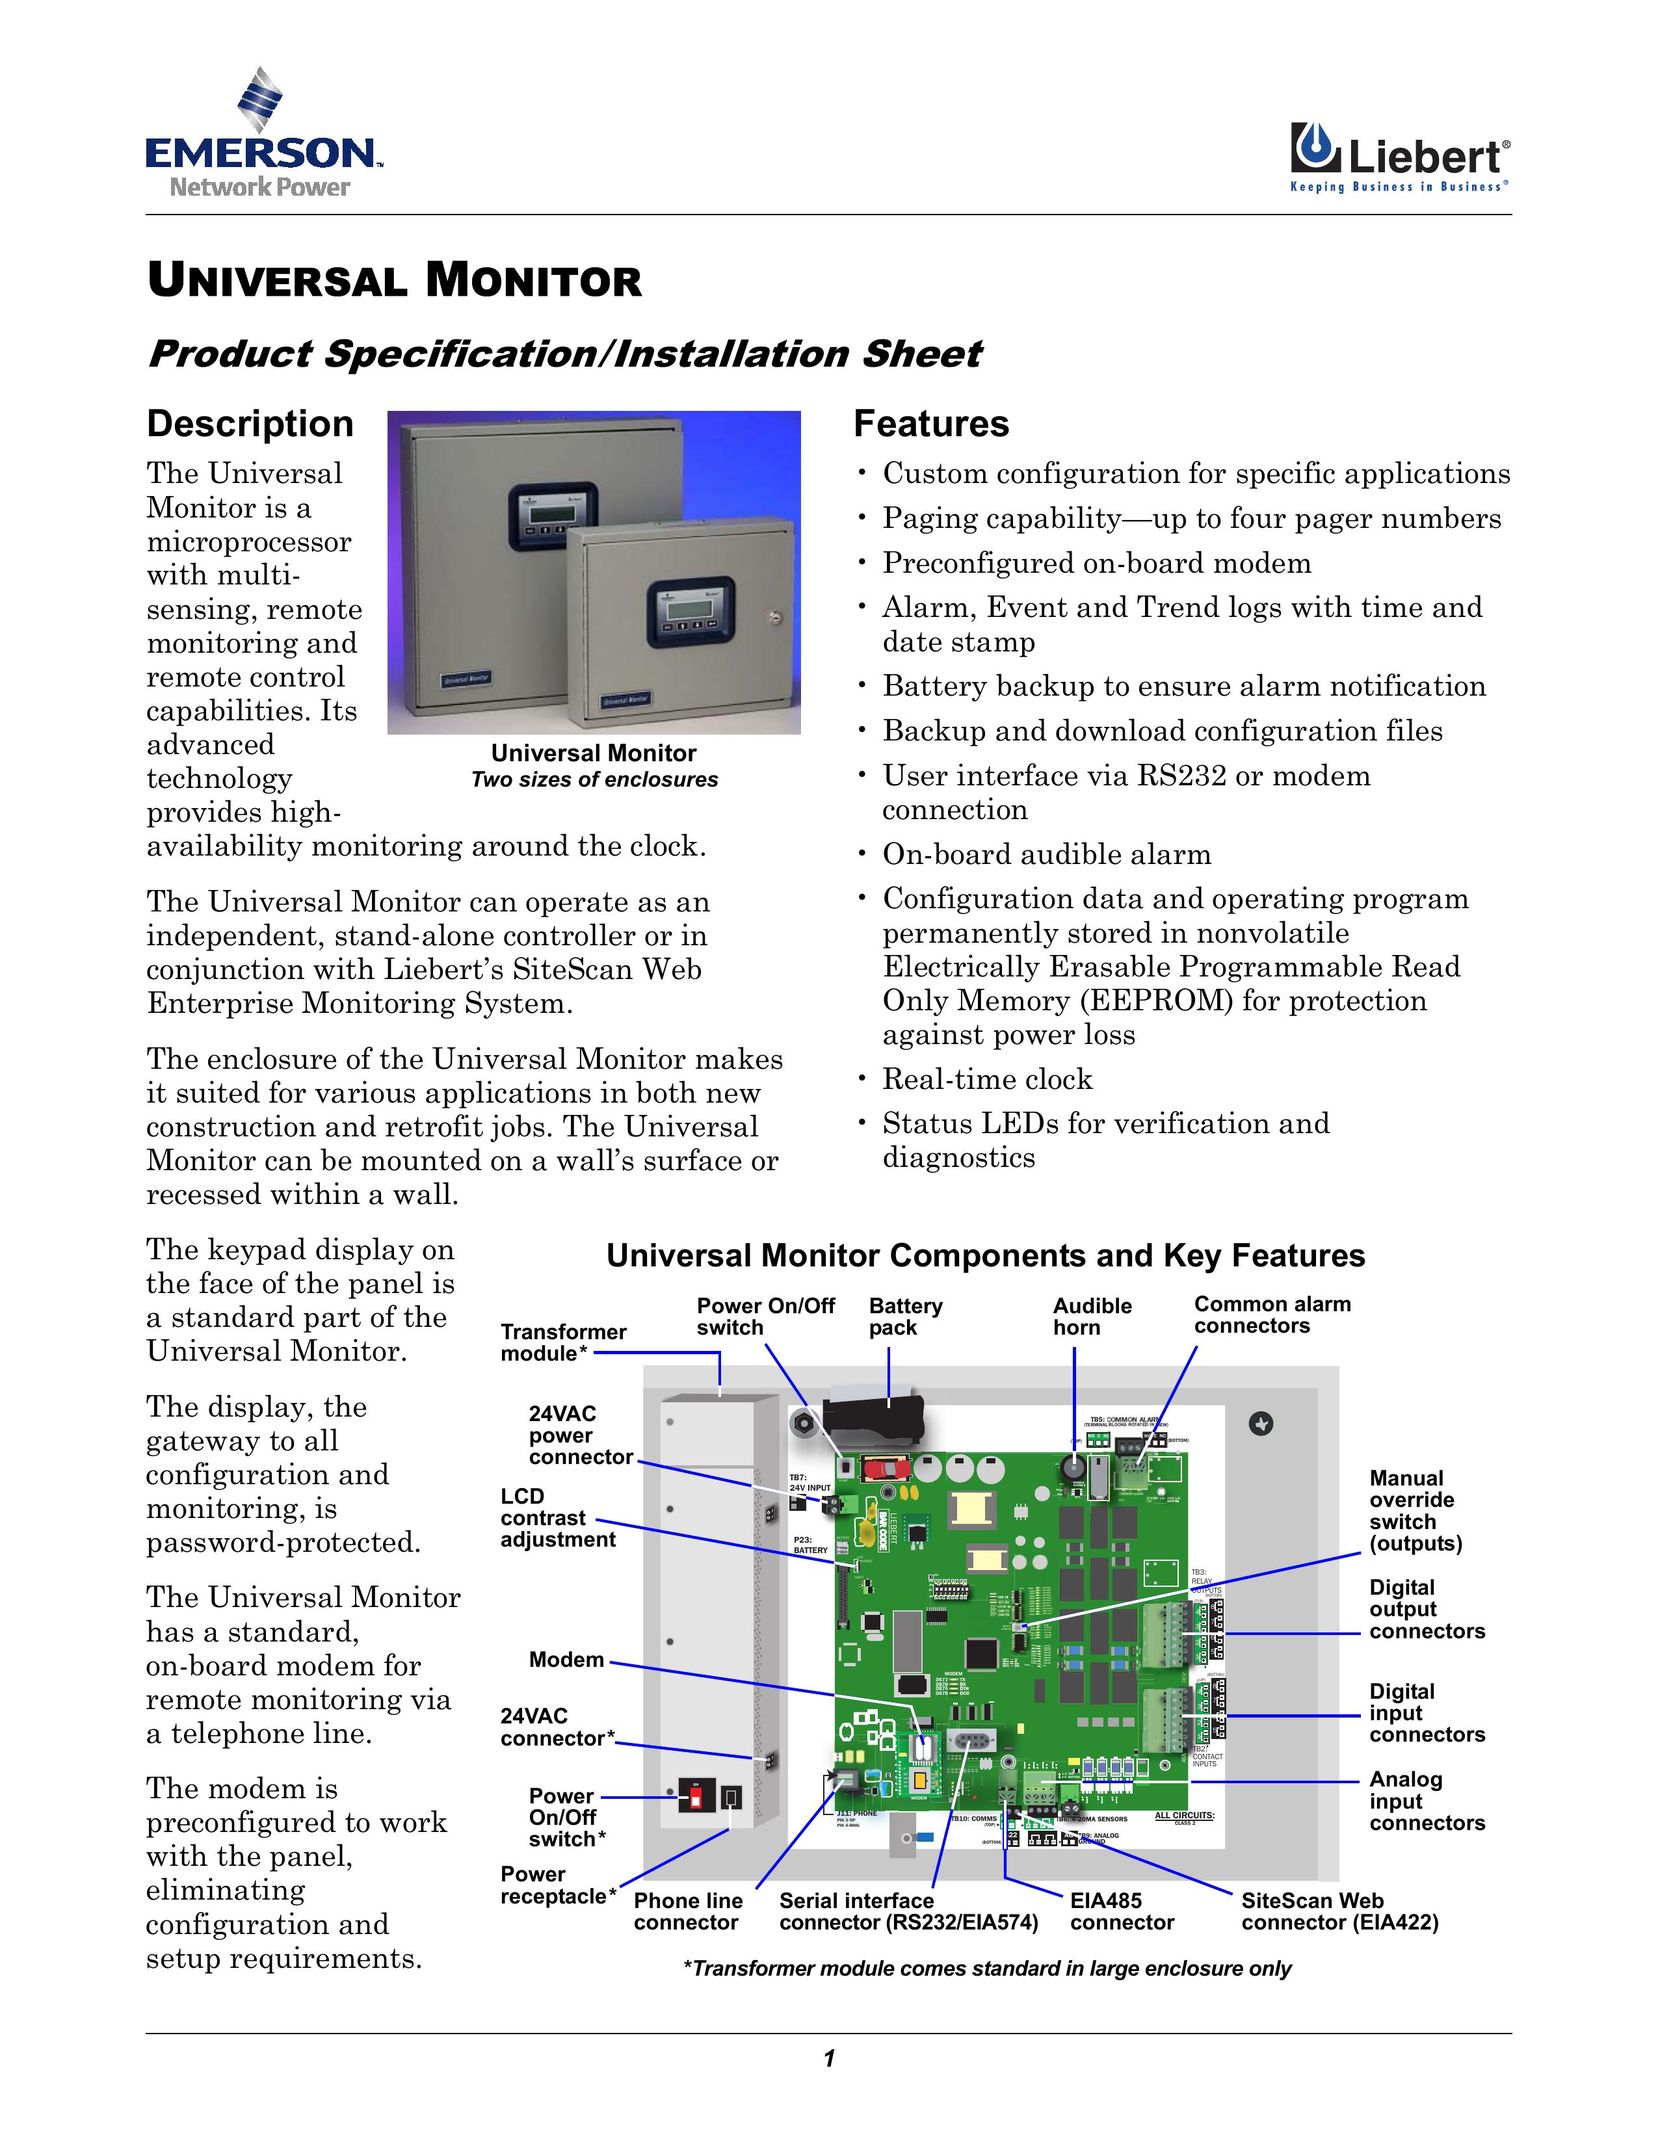 Emerson TM230 Pager User Manual